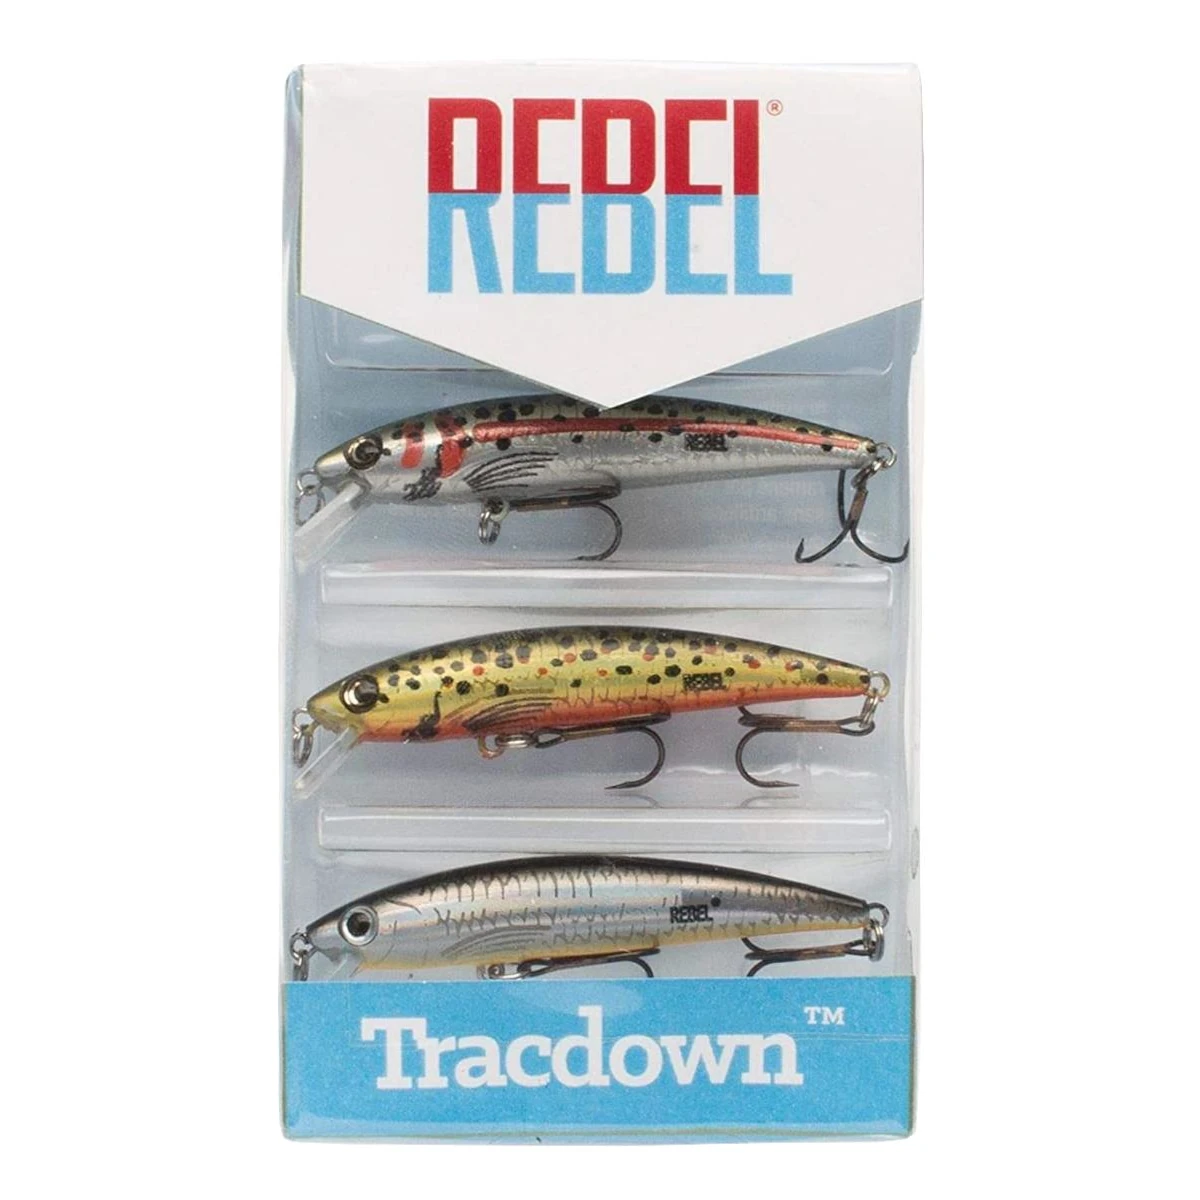 Rebel Tracdown Ghost Minnow 3-Pack